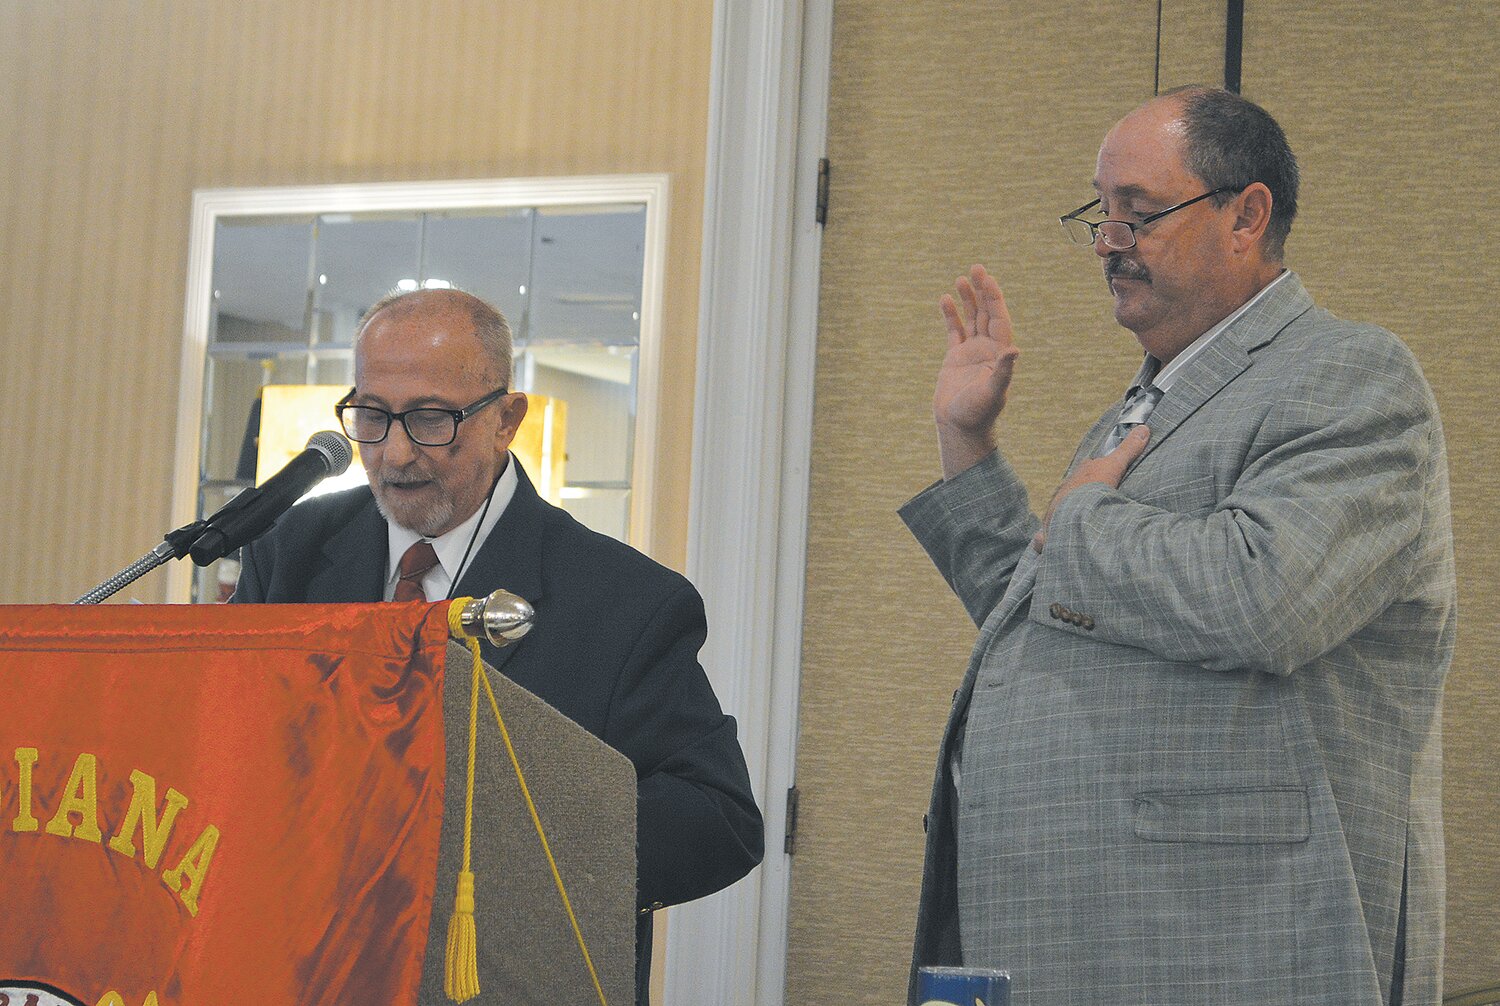 Henry Carrell, right, is being sworn in by Ed Chandler from Jasper.